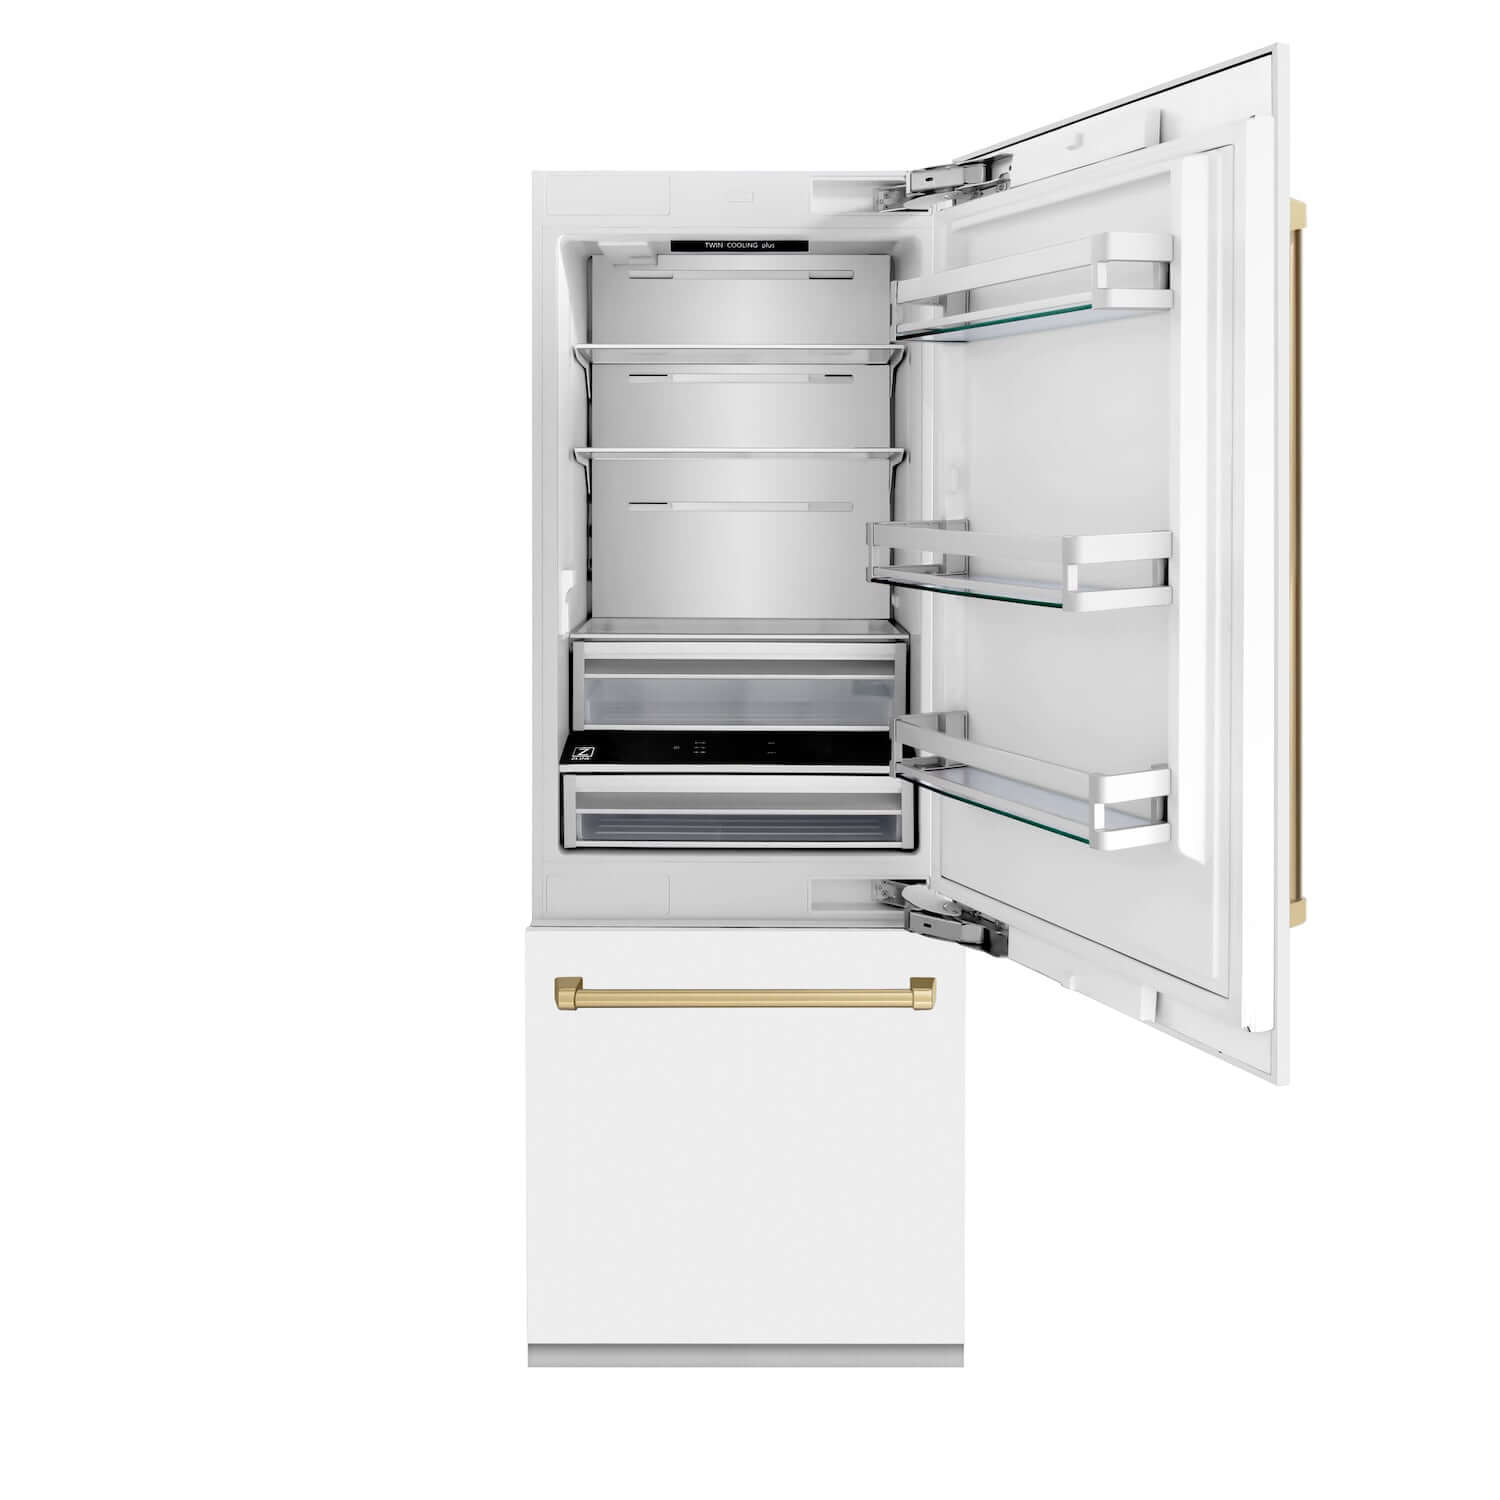 ZLINE 30" Autograph Edition 16.1 cu. ft. Built-in 2-Door Bottom Freezer Refrigerator with Internal Water and Ice Dispenser in White Matte with Champagne Bronze Accents (RBIVZ-WM-30-CB)